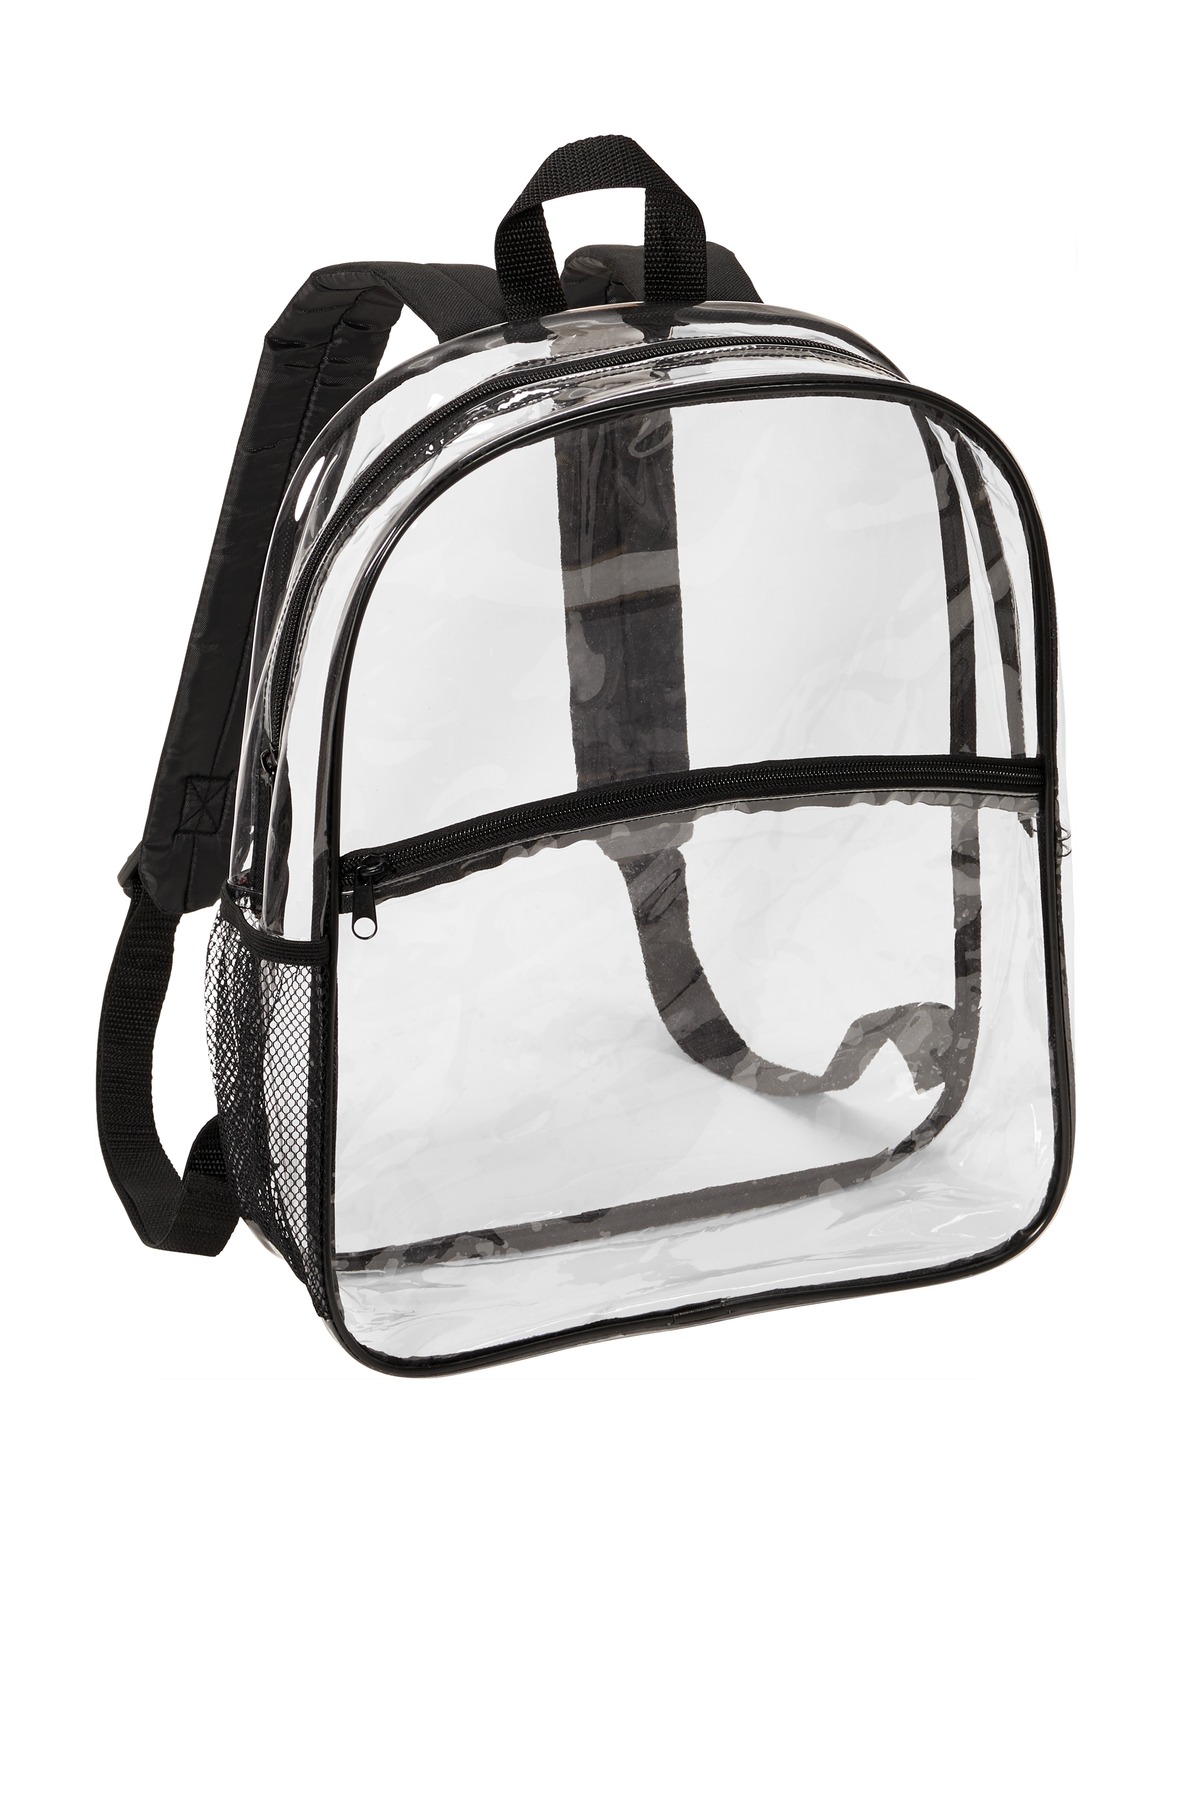 Port Authority Adult Unisex Clear Backpack Clear/Black One Size Fits All - image 1 of 3